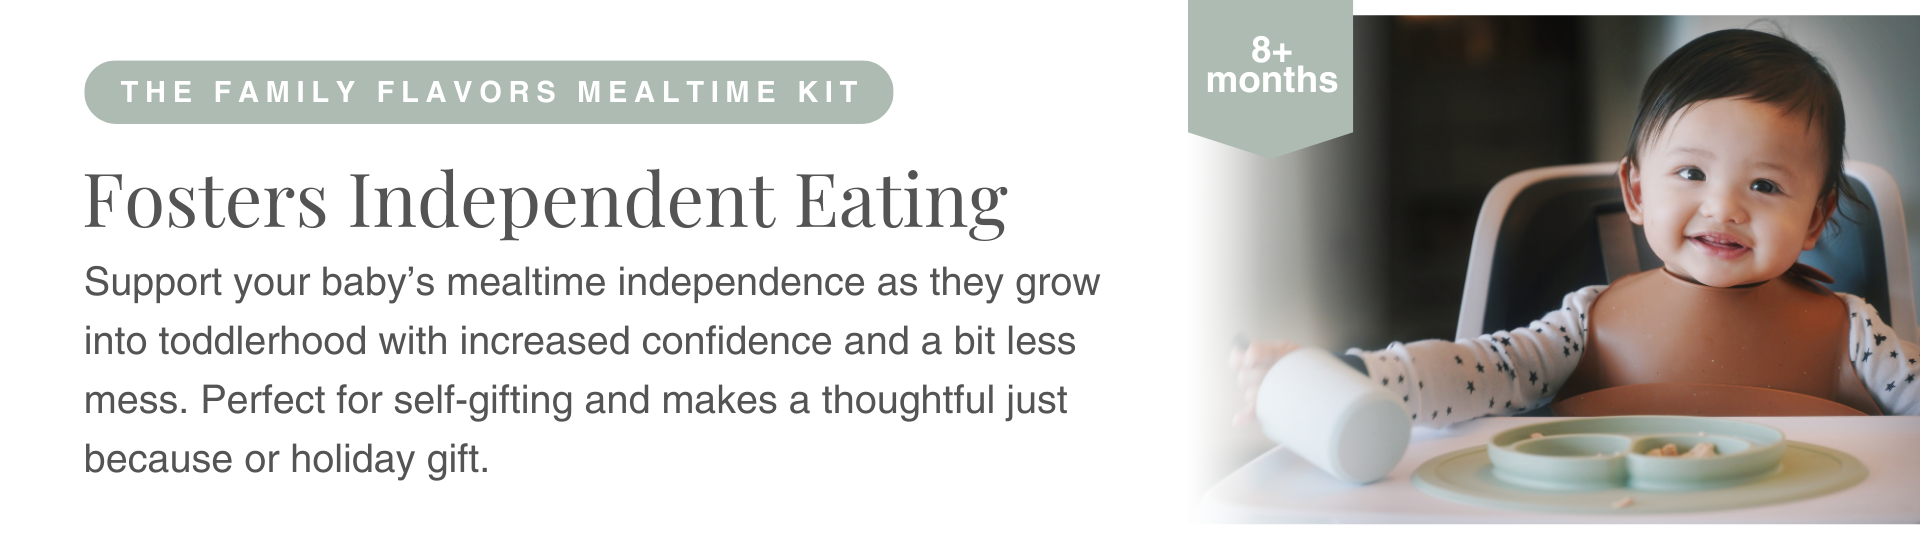 The Family Flavors Mealtime Kit, a thoughtful gift for fostering eating independence 